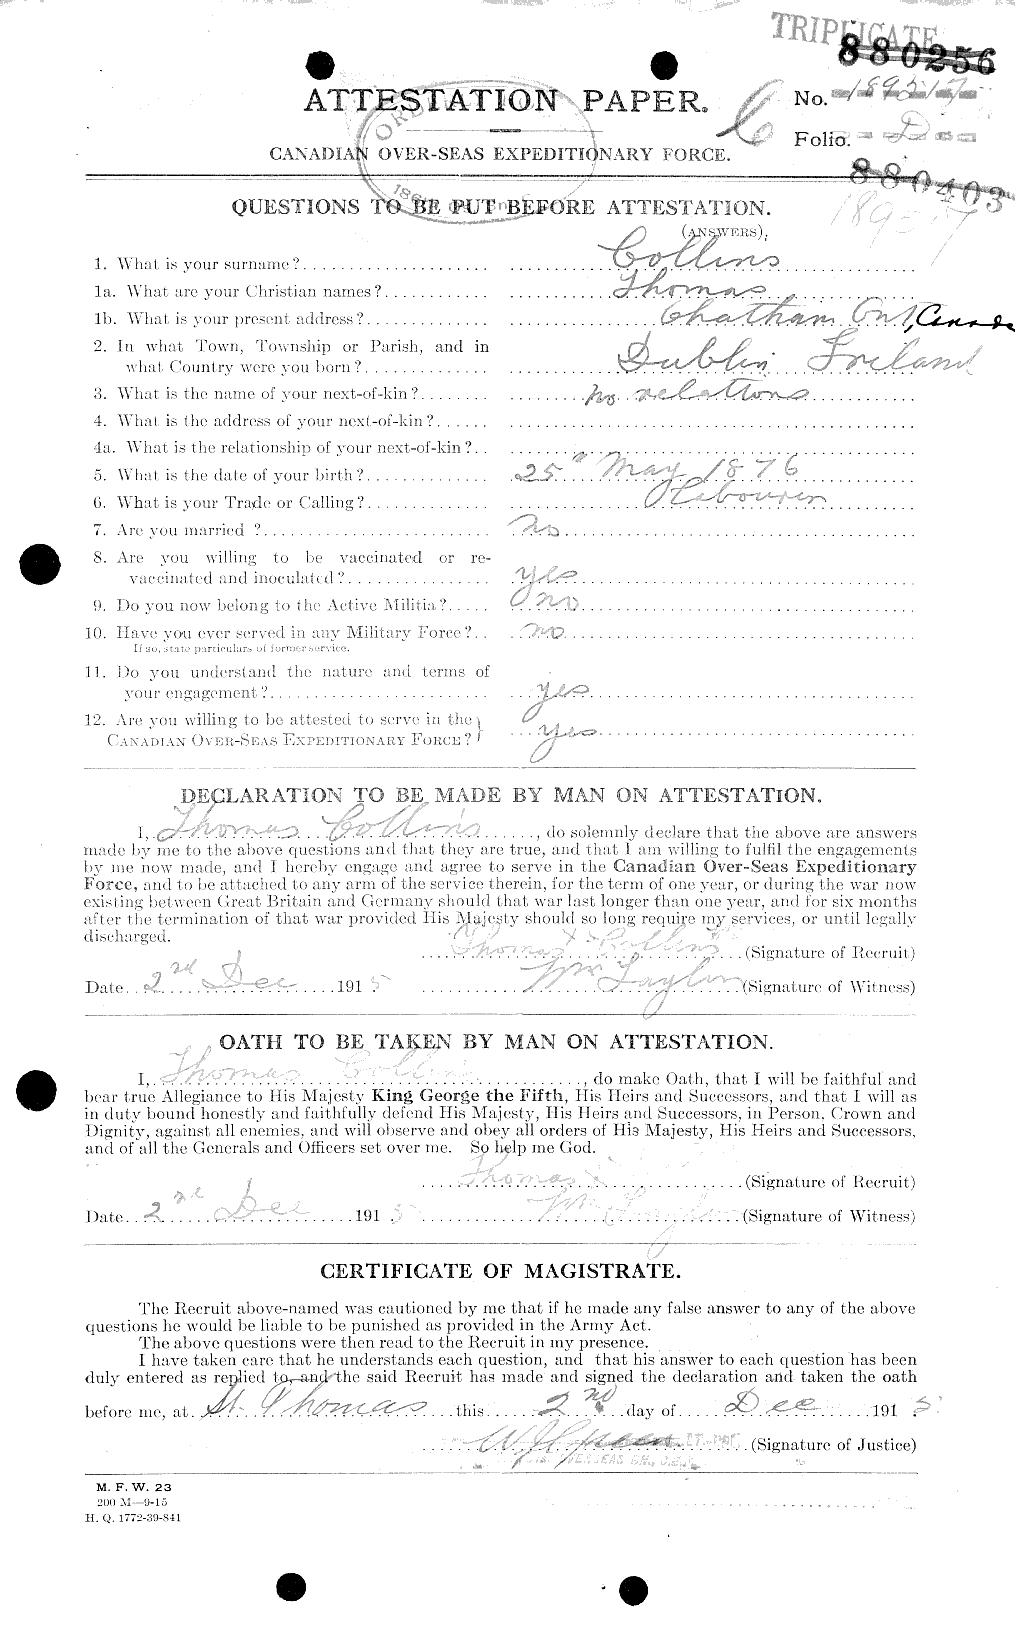 Personnel Records of the First World War - CEF 034562a